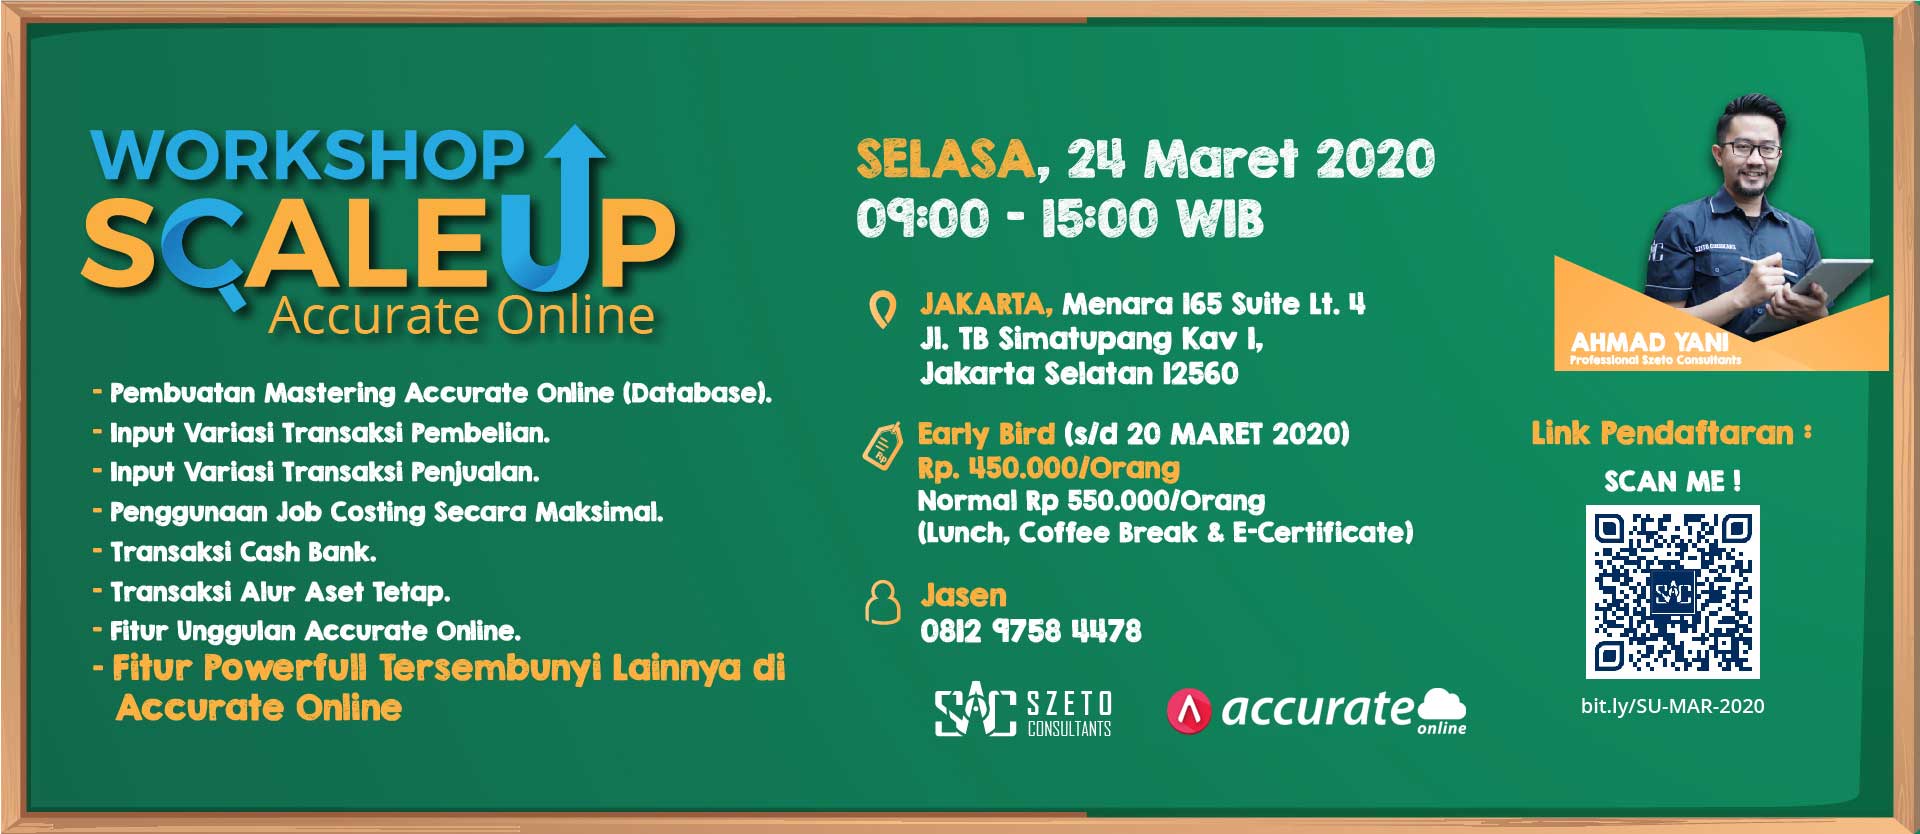 [Jakarta] Workshop SCALE UP Accurate Online